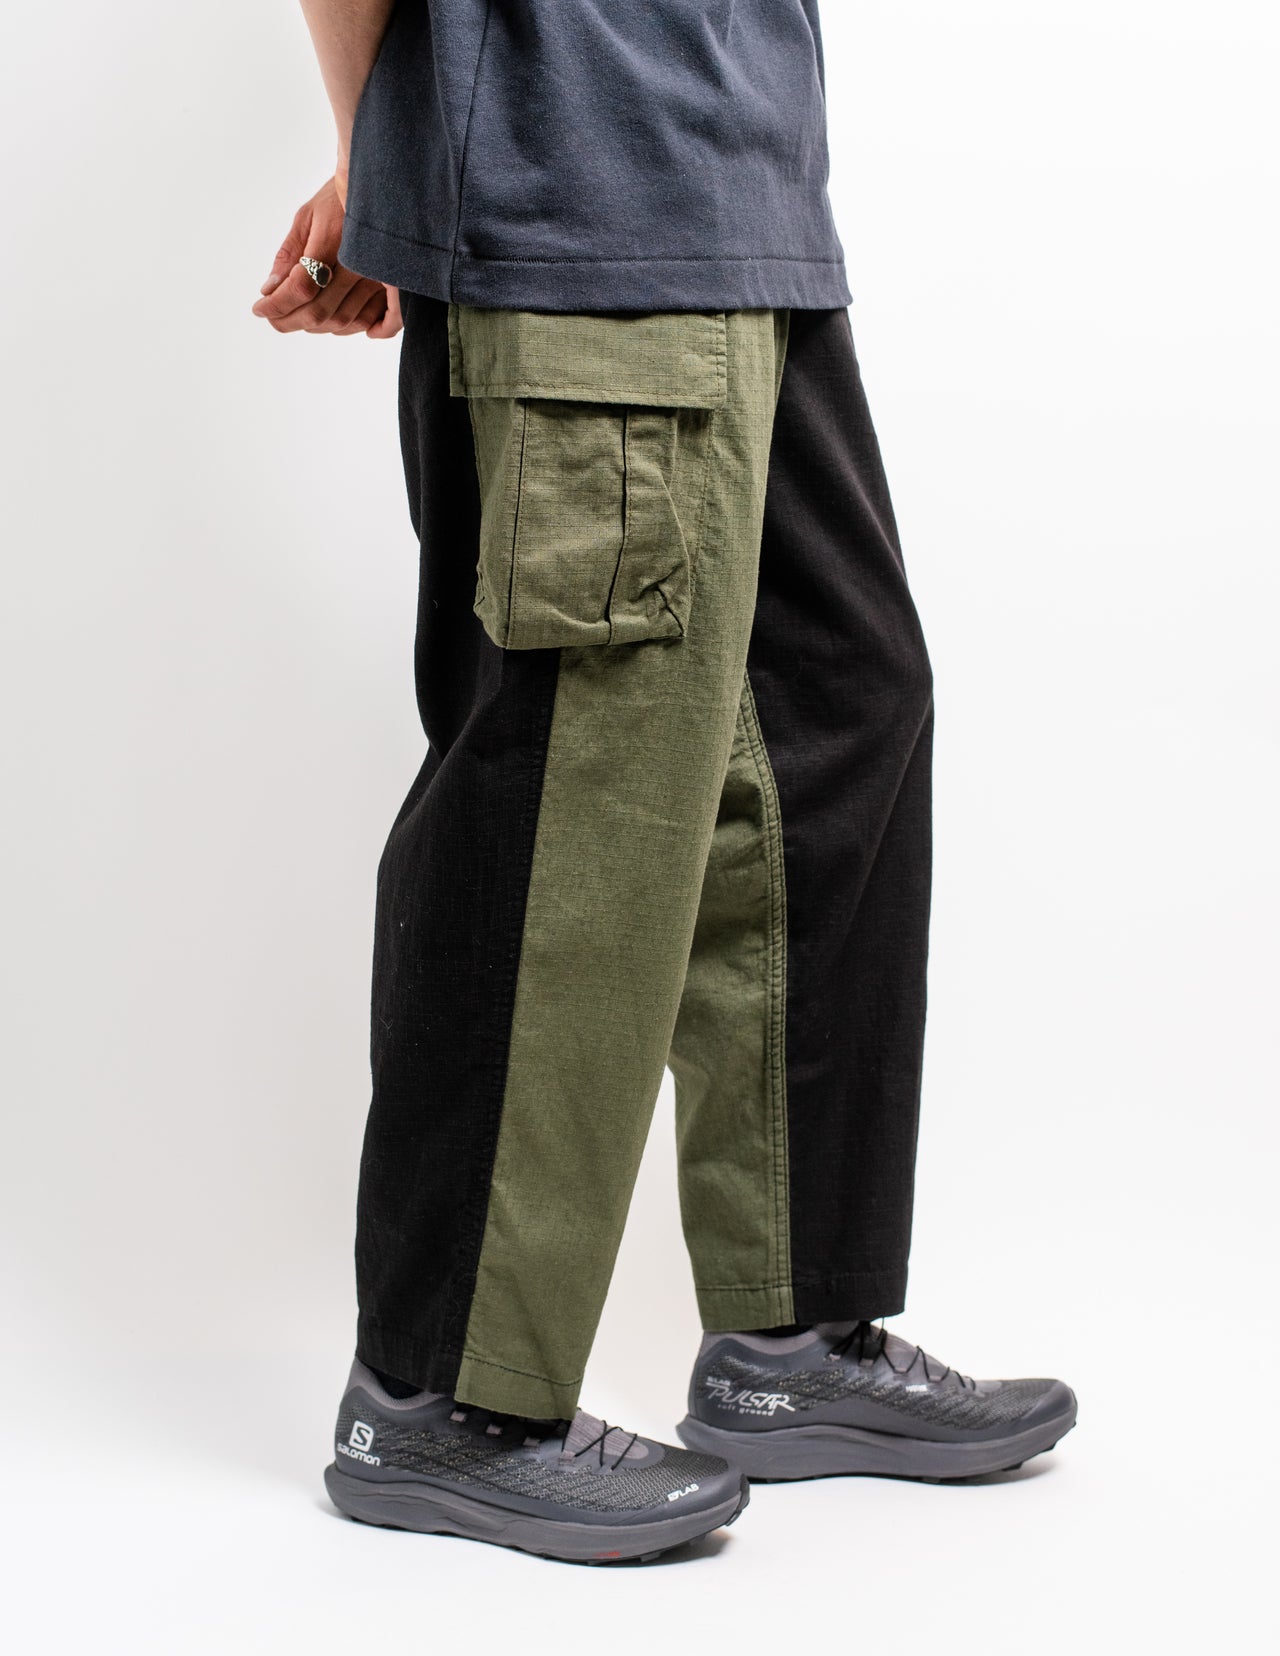 MH-Rip Cocoon Cargo Pants in Multi